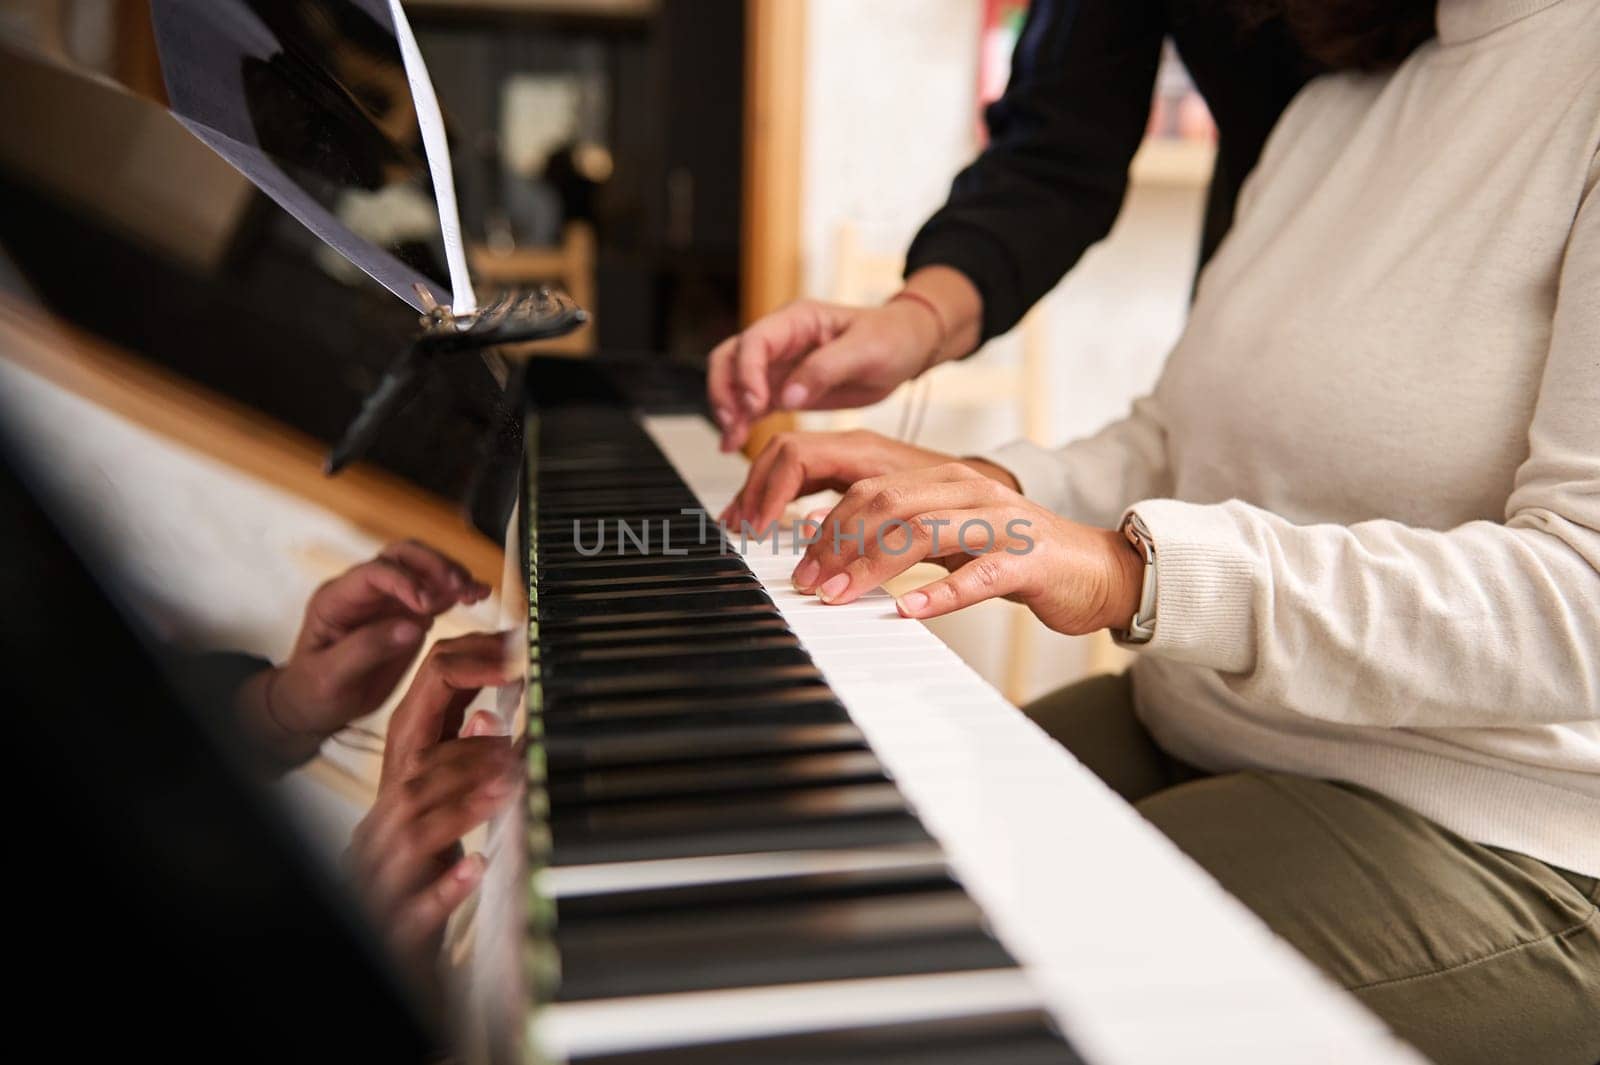 Female hands playing grand piano under the guidance of a music teacher. Close-up fingers touch ebony and ivory piano keys. Photo shot with perspective. People. Music. Arts, culture and entertainment